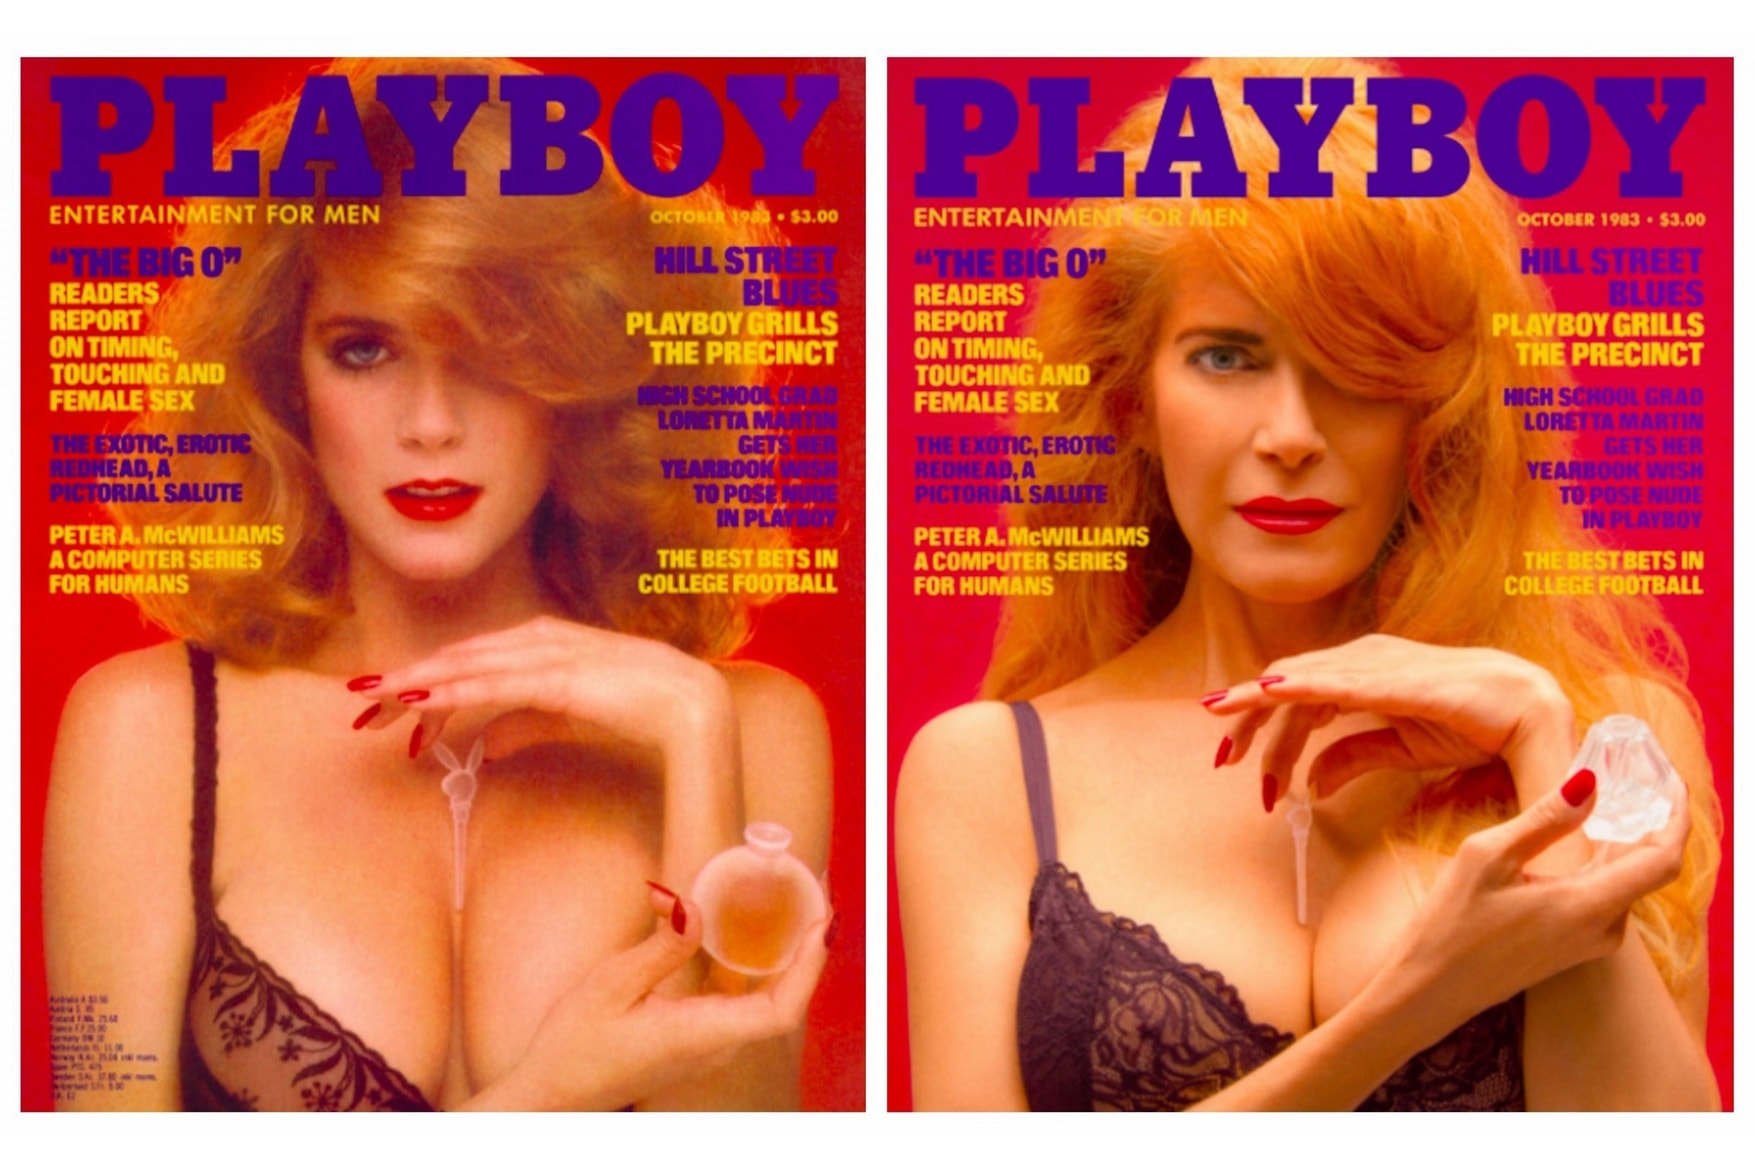 Past Playboy Playmates Recreate Their Cover Issues